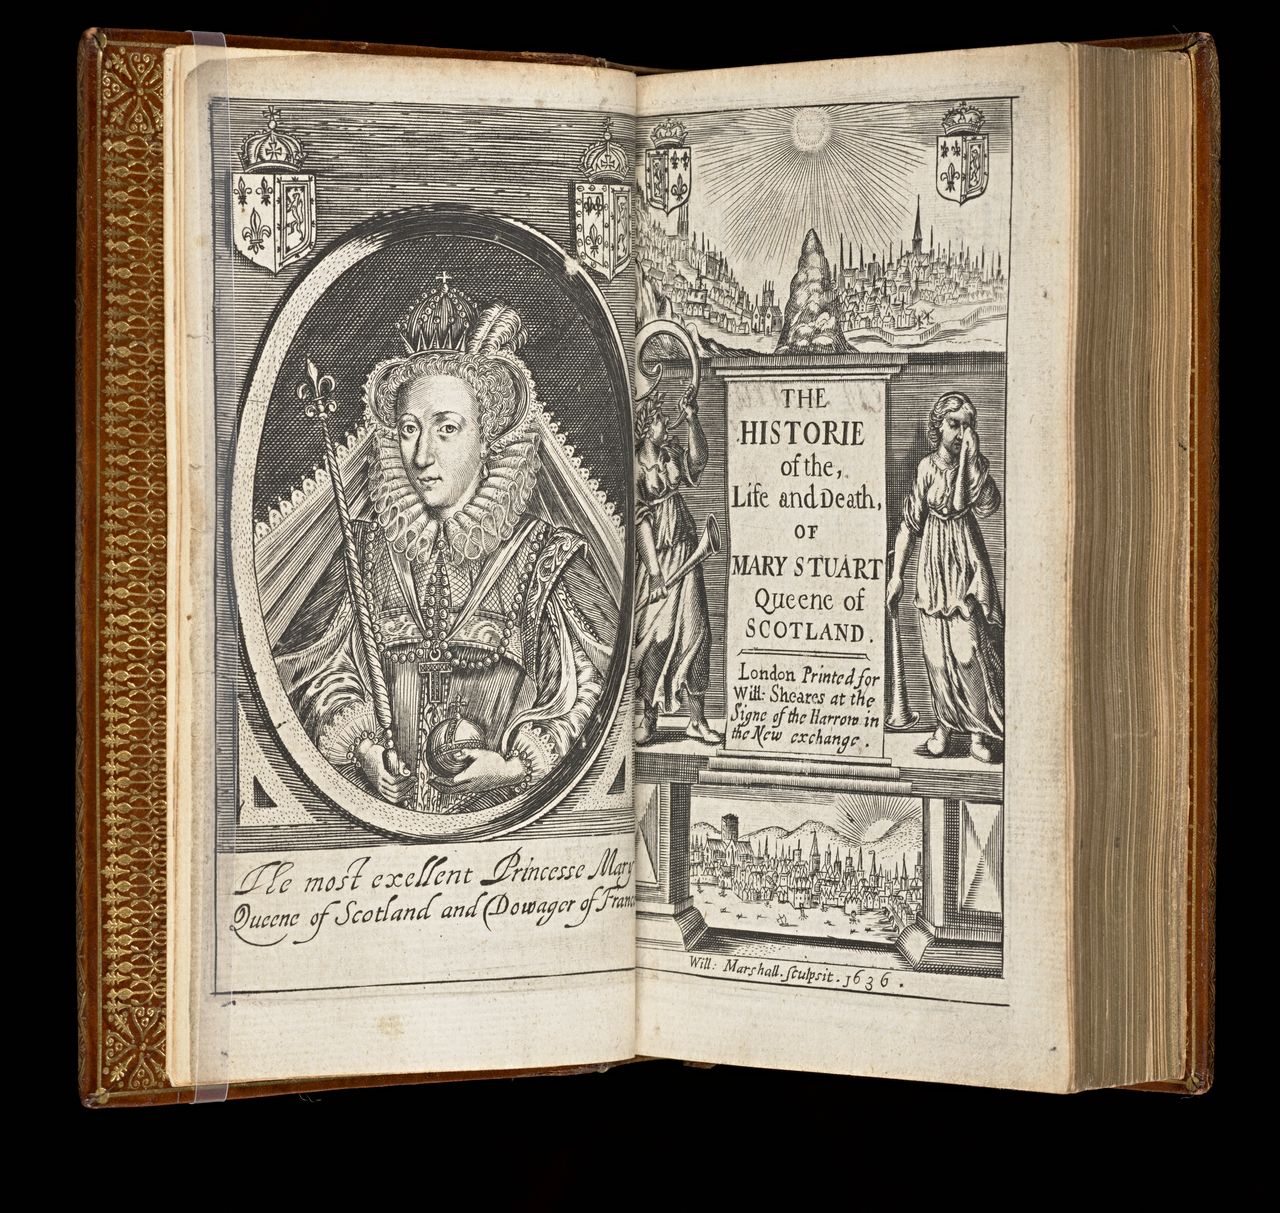 William Camden, <em>The historie of the life and death of Mary Stuart, Queene of Scotland</em>, London, printed by Iohn Haviland, and are to be sold by William Sheares in Britaines Burse at the signe of the Harrow, 1636, State Library Victoria, Melbourne (RAREEMM 114/14)
